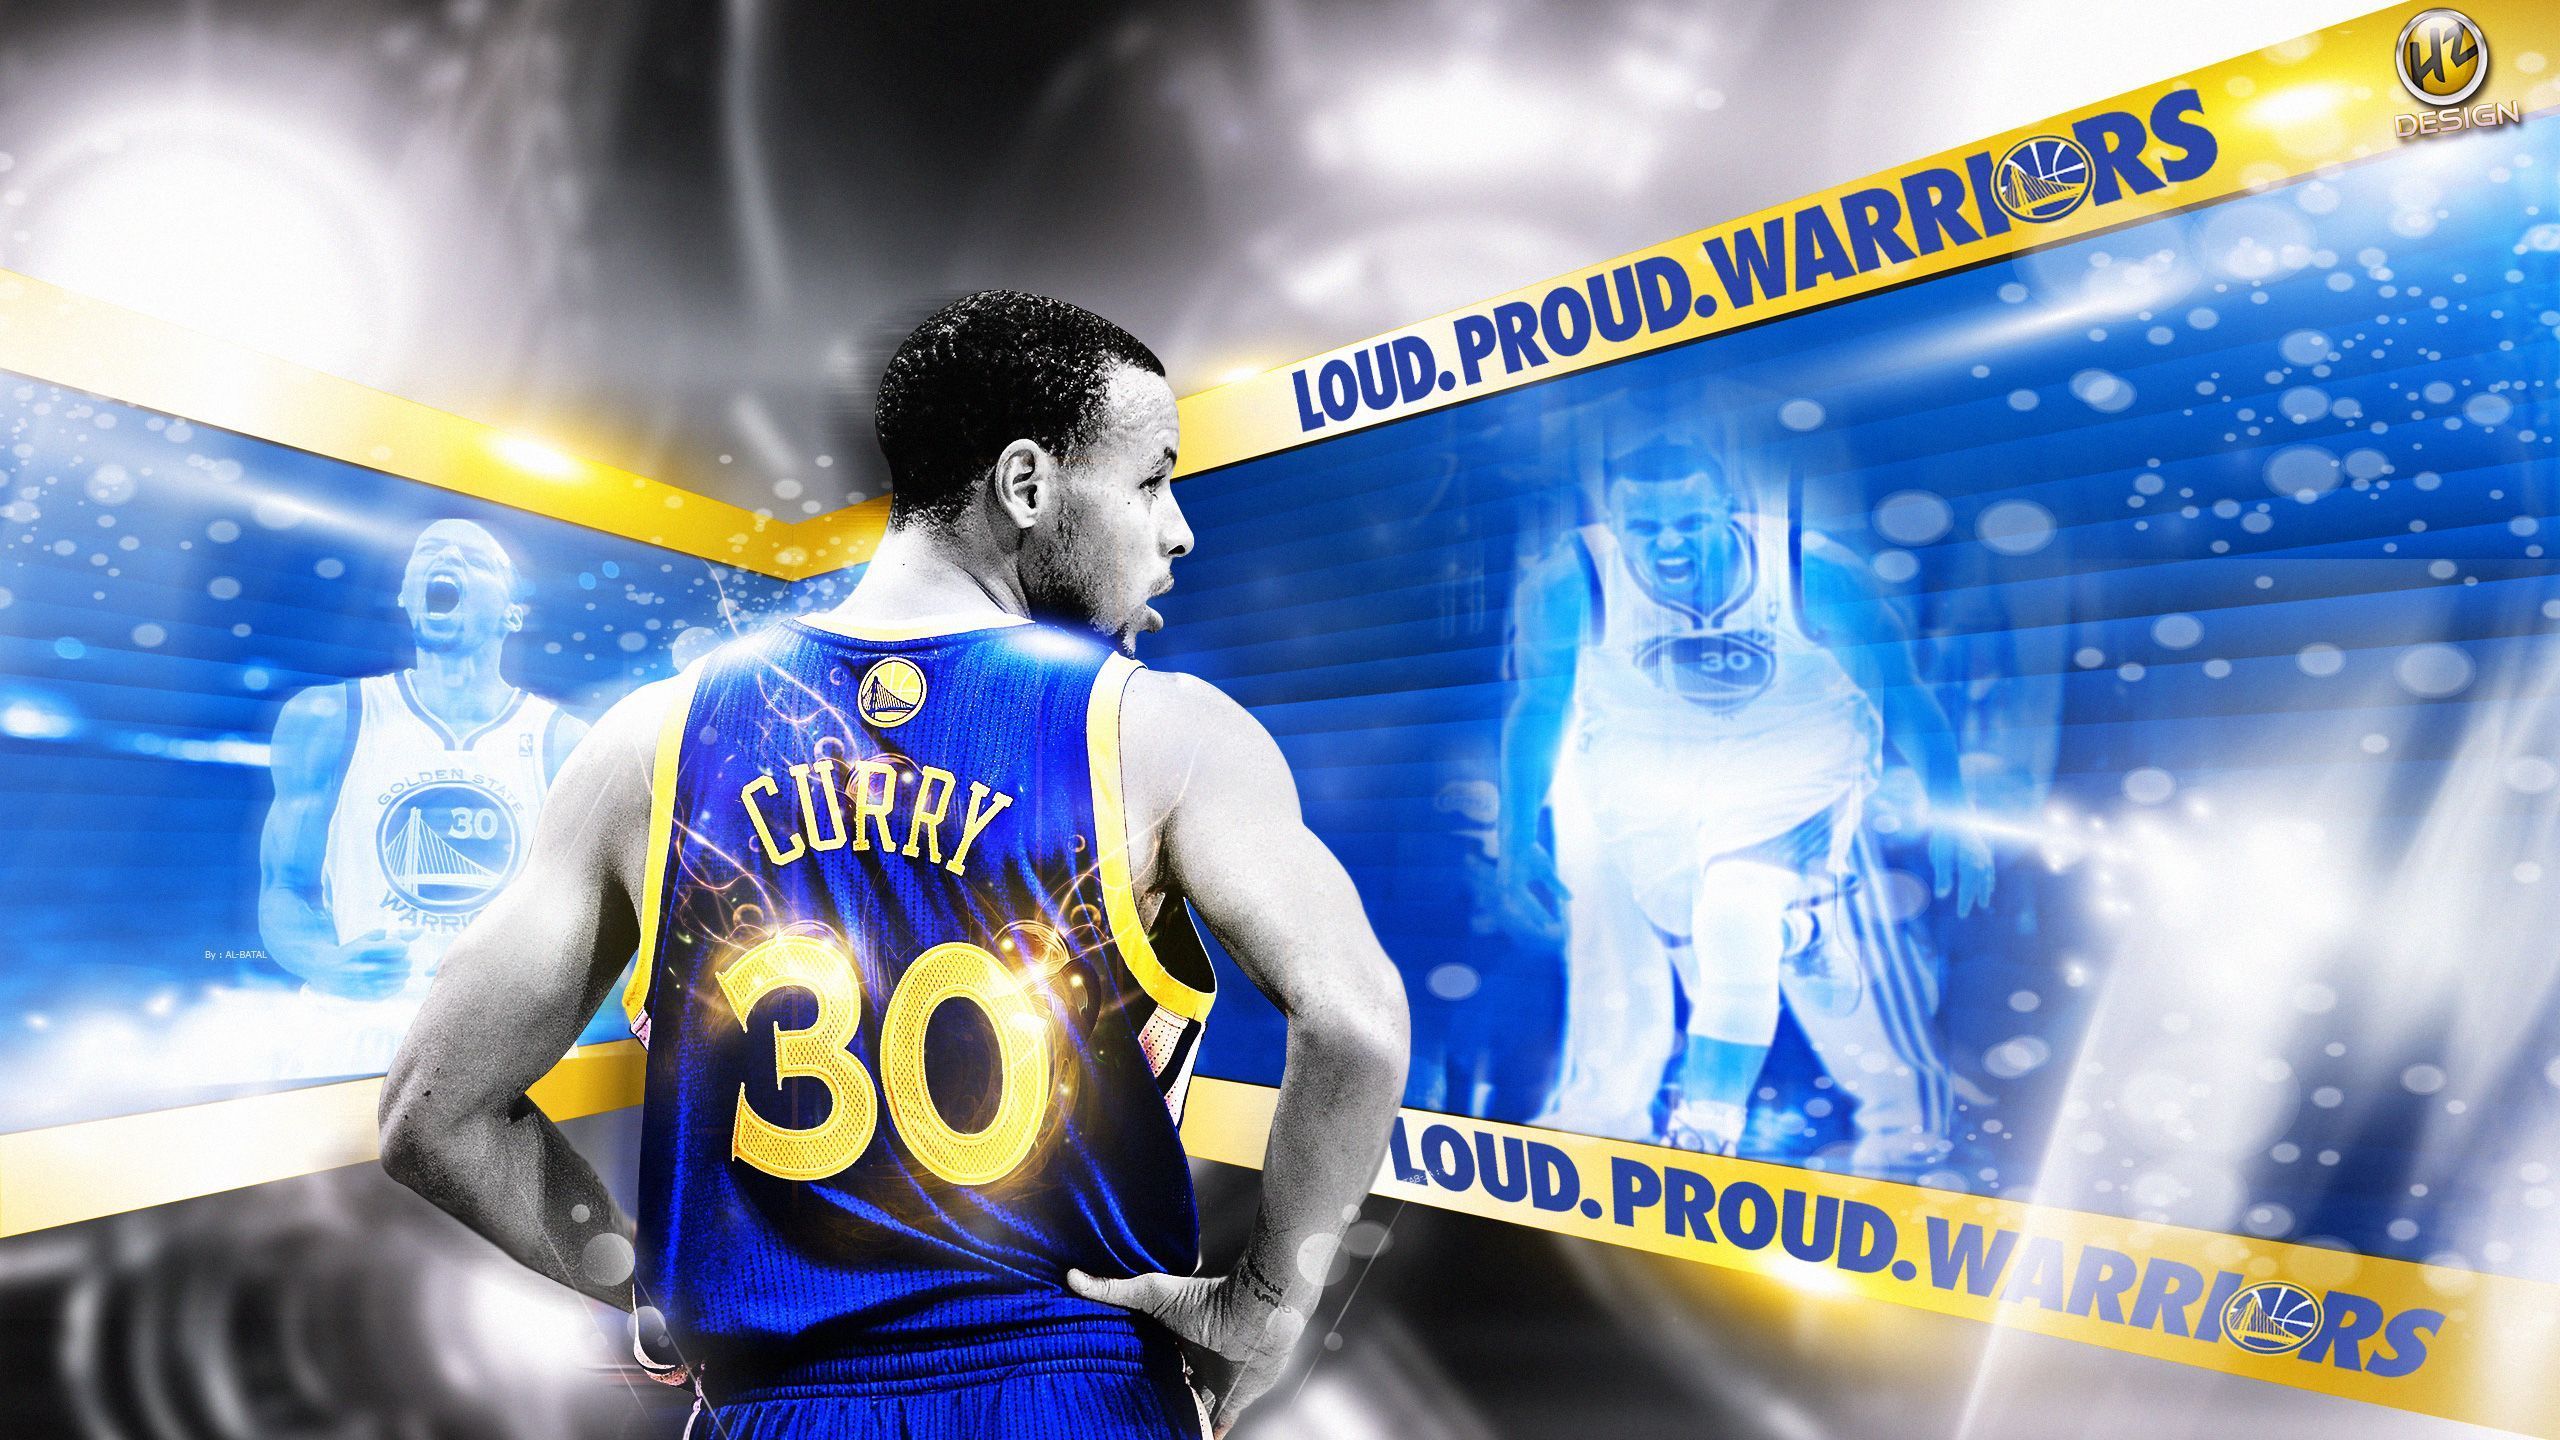 Stephen Curry Wallpapers Basketball Wallpapers at